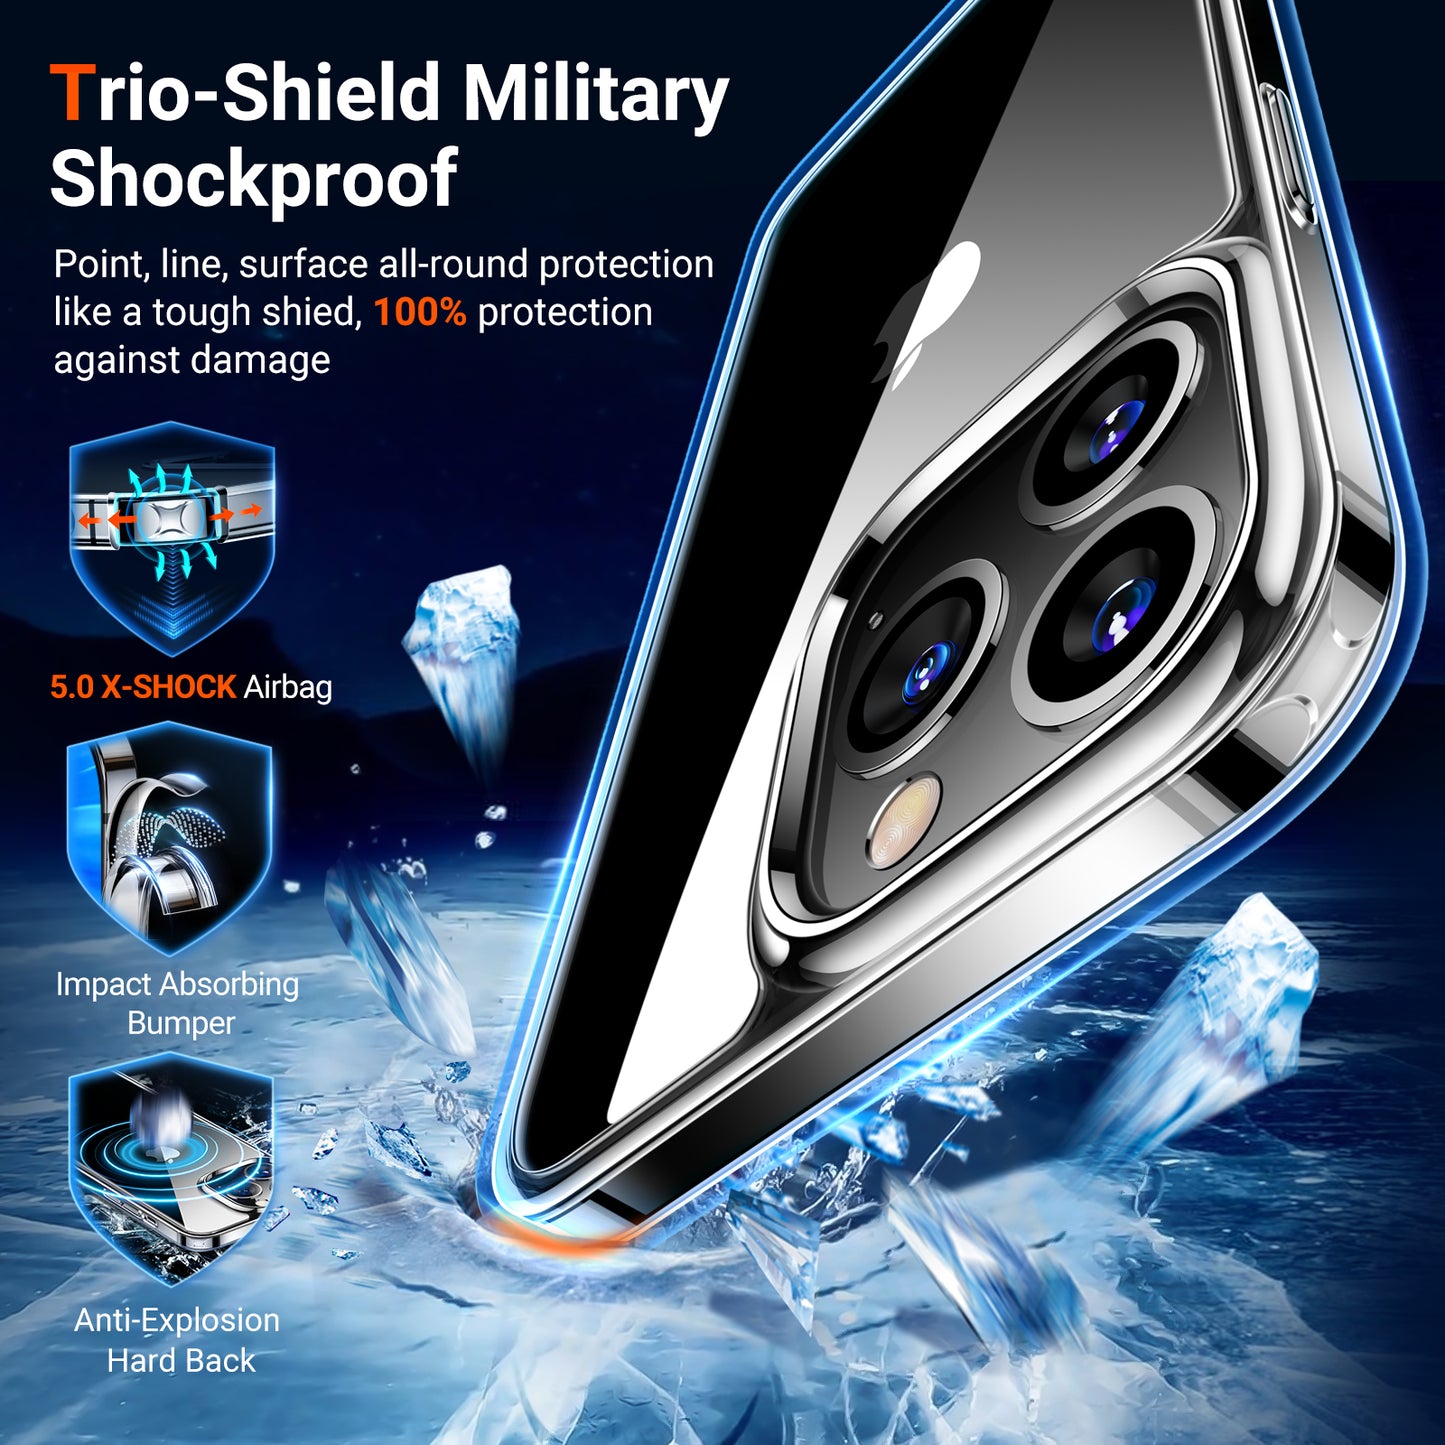 TORRAS Diamond Clear for iPhone 13 | Military Grade